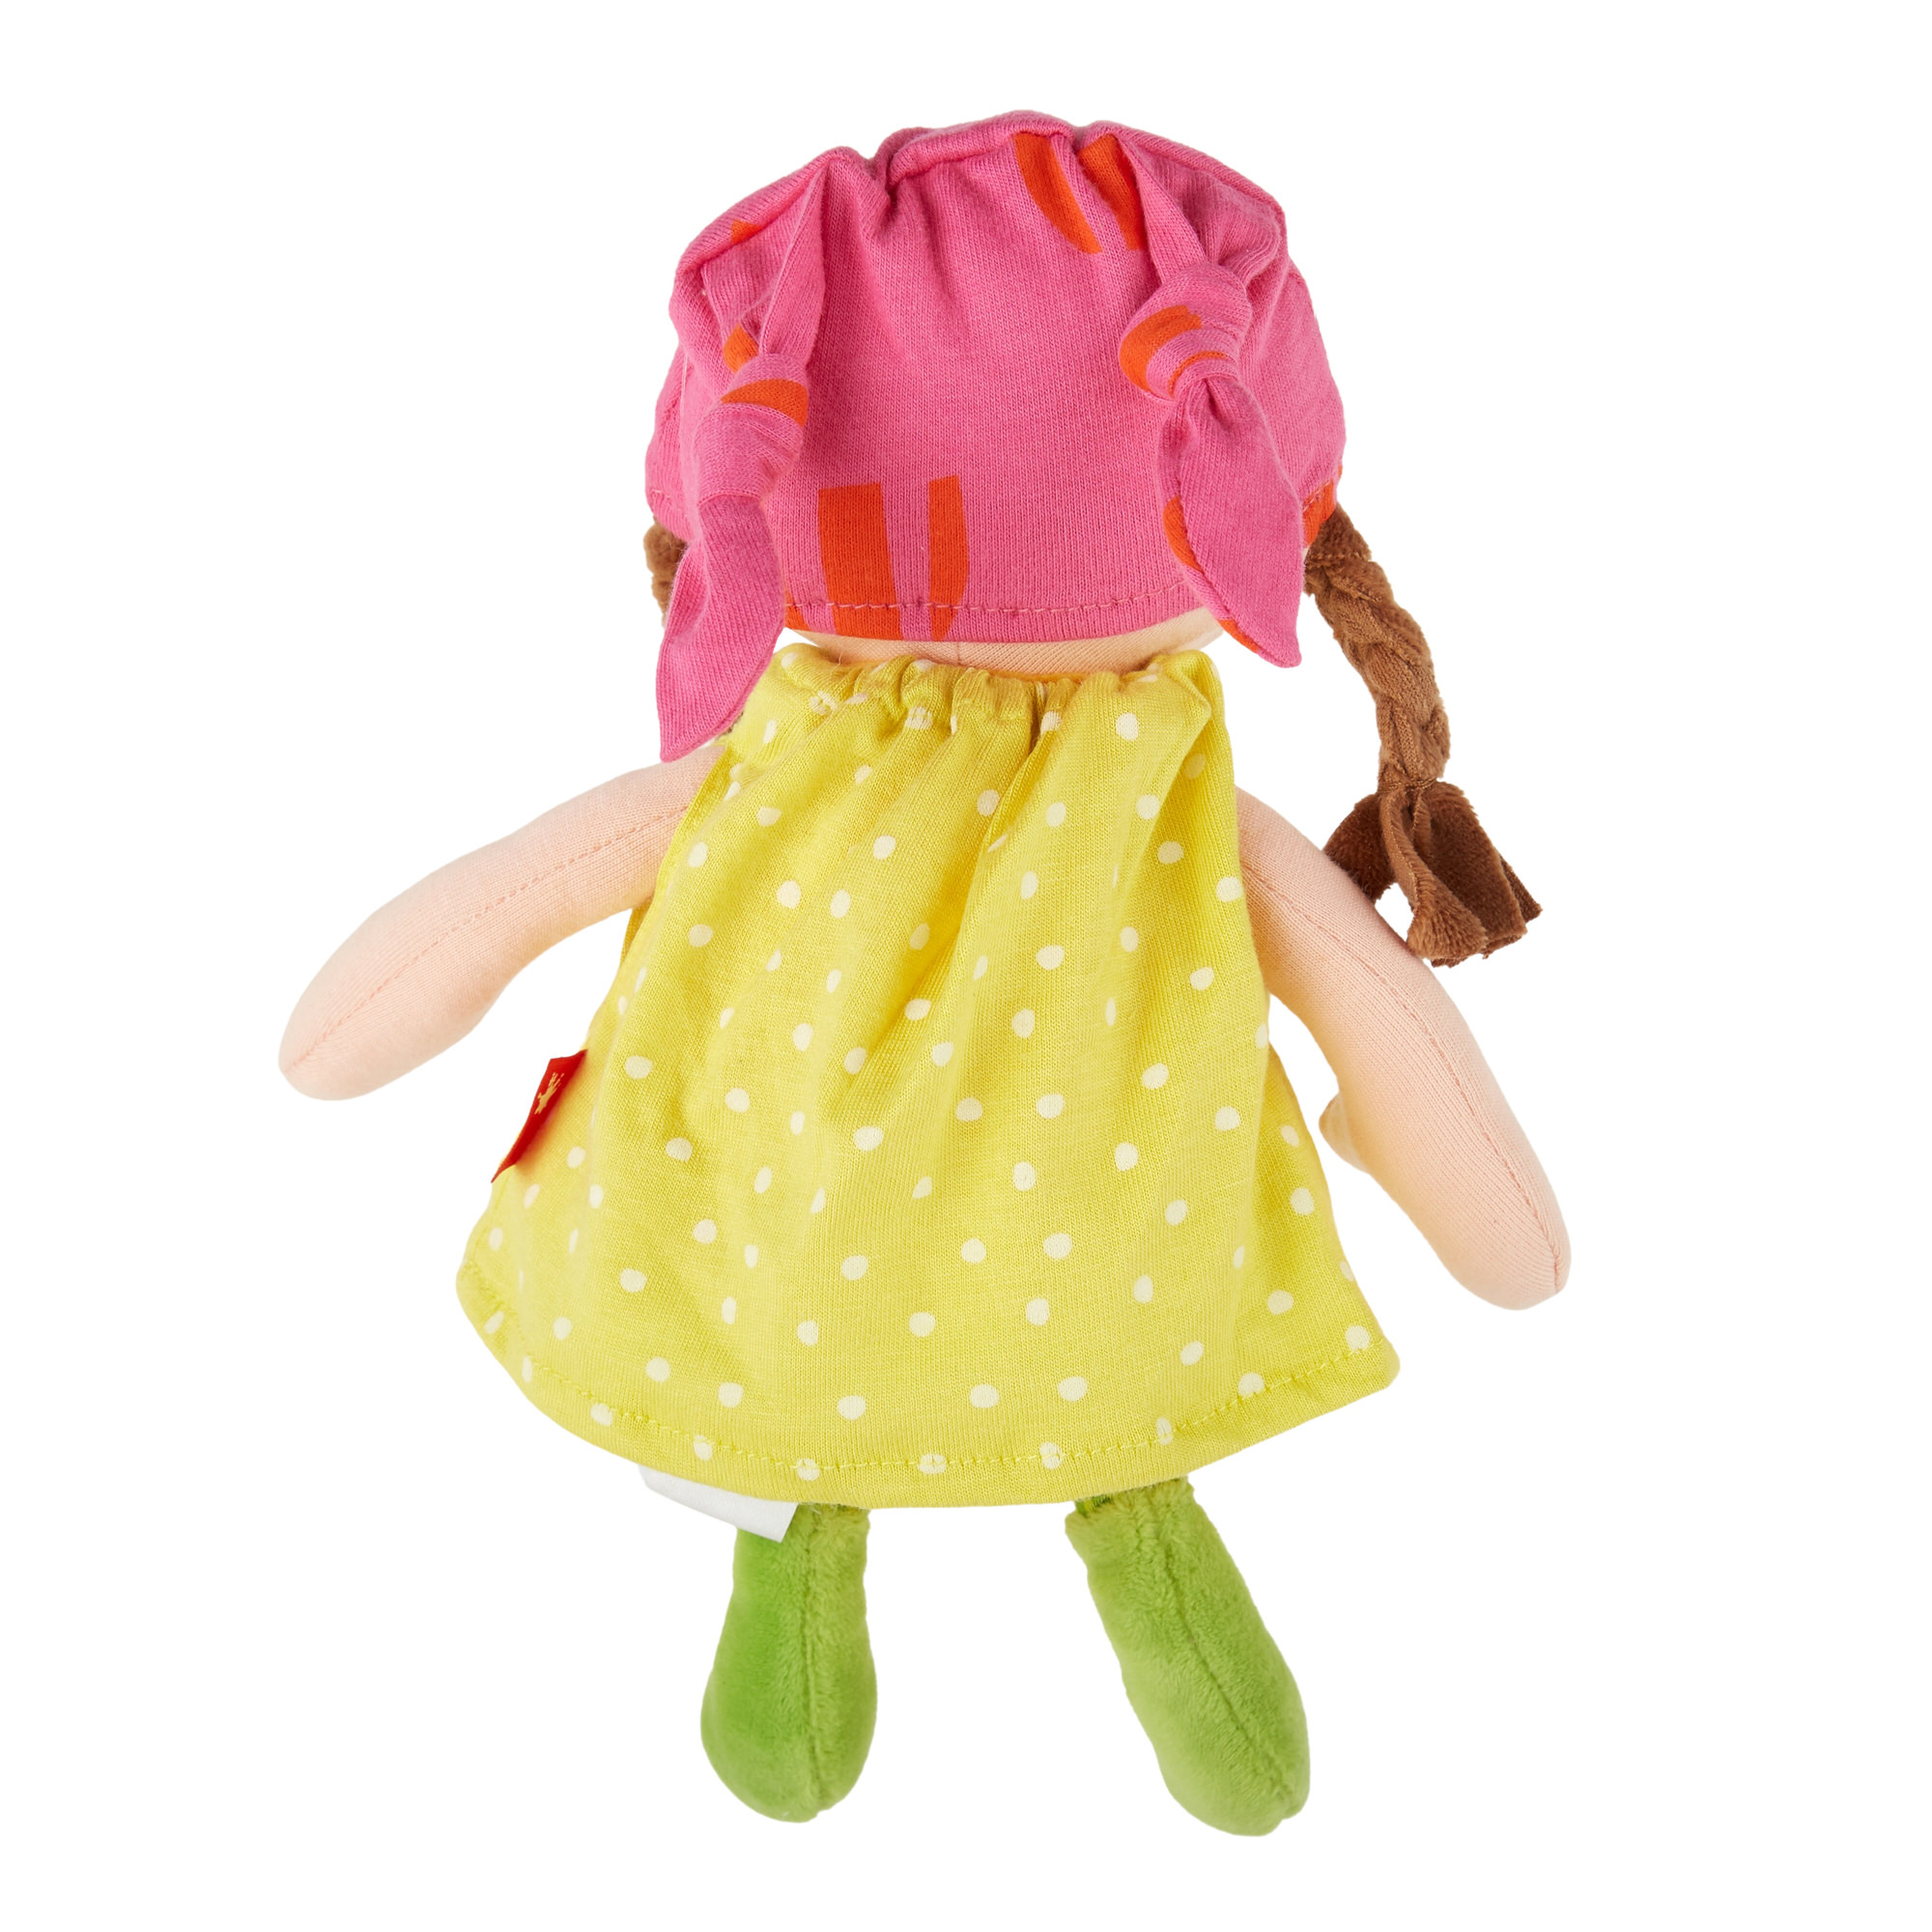 Soft plush baby doll green dotted